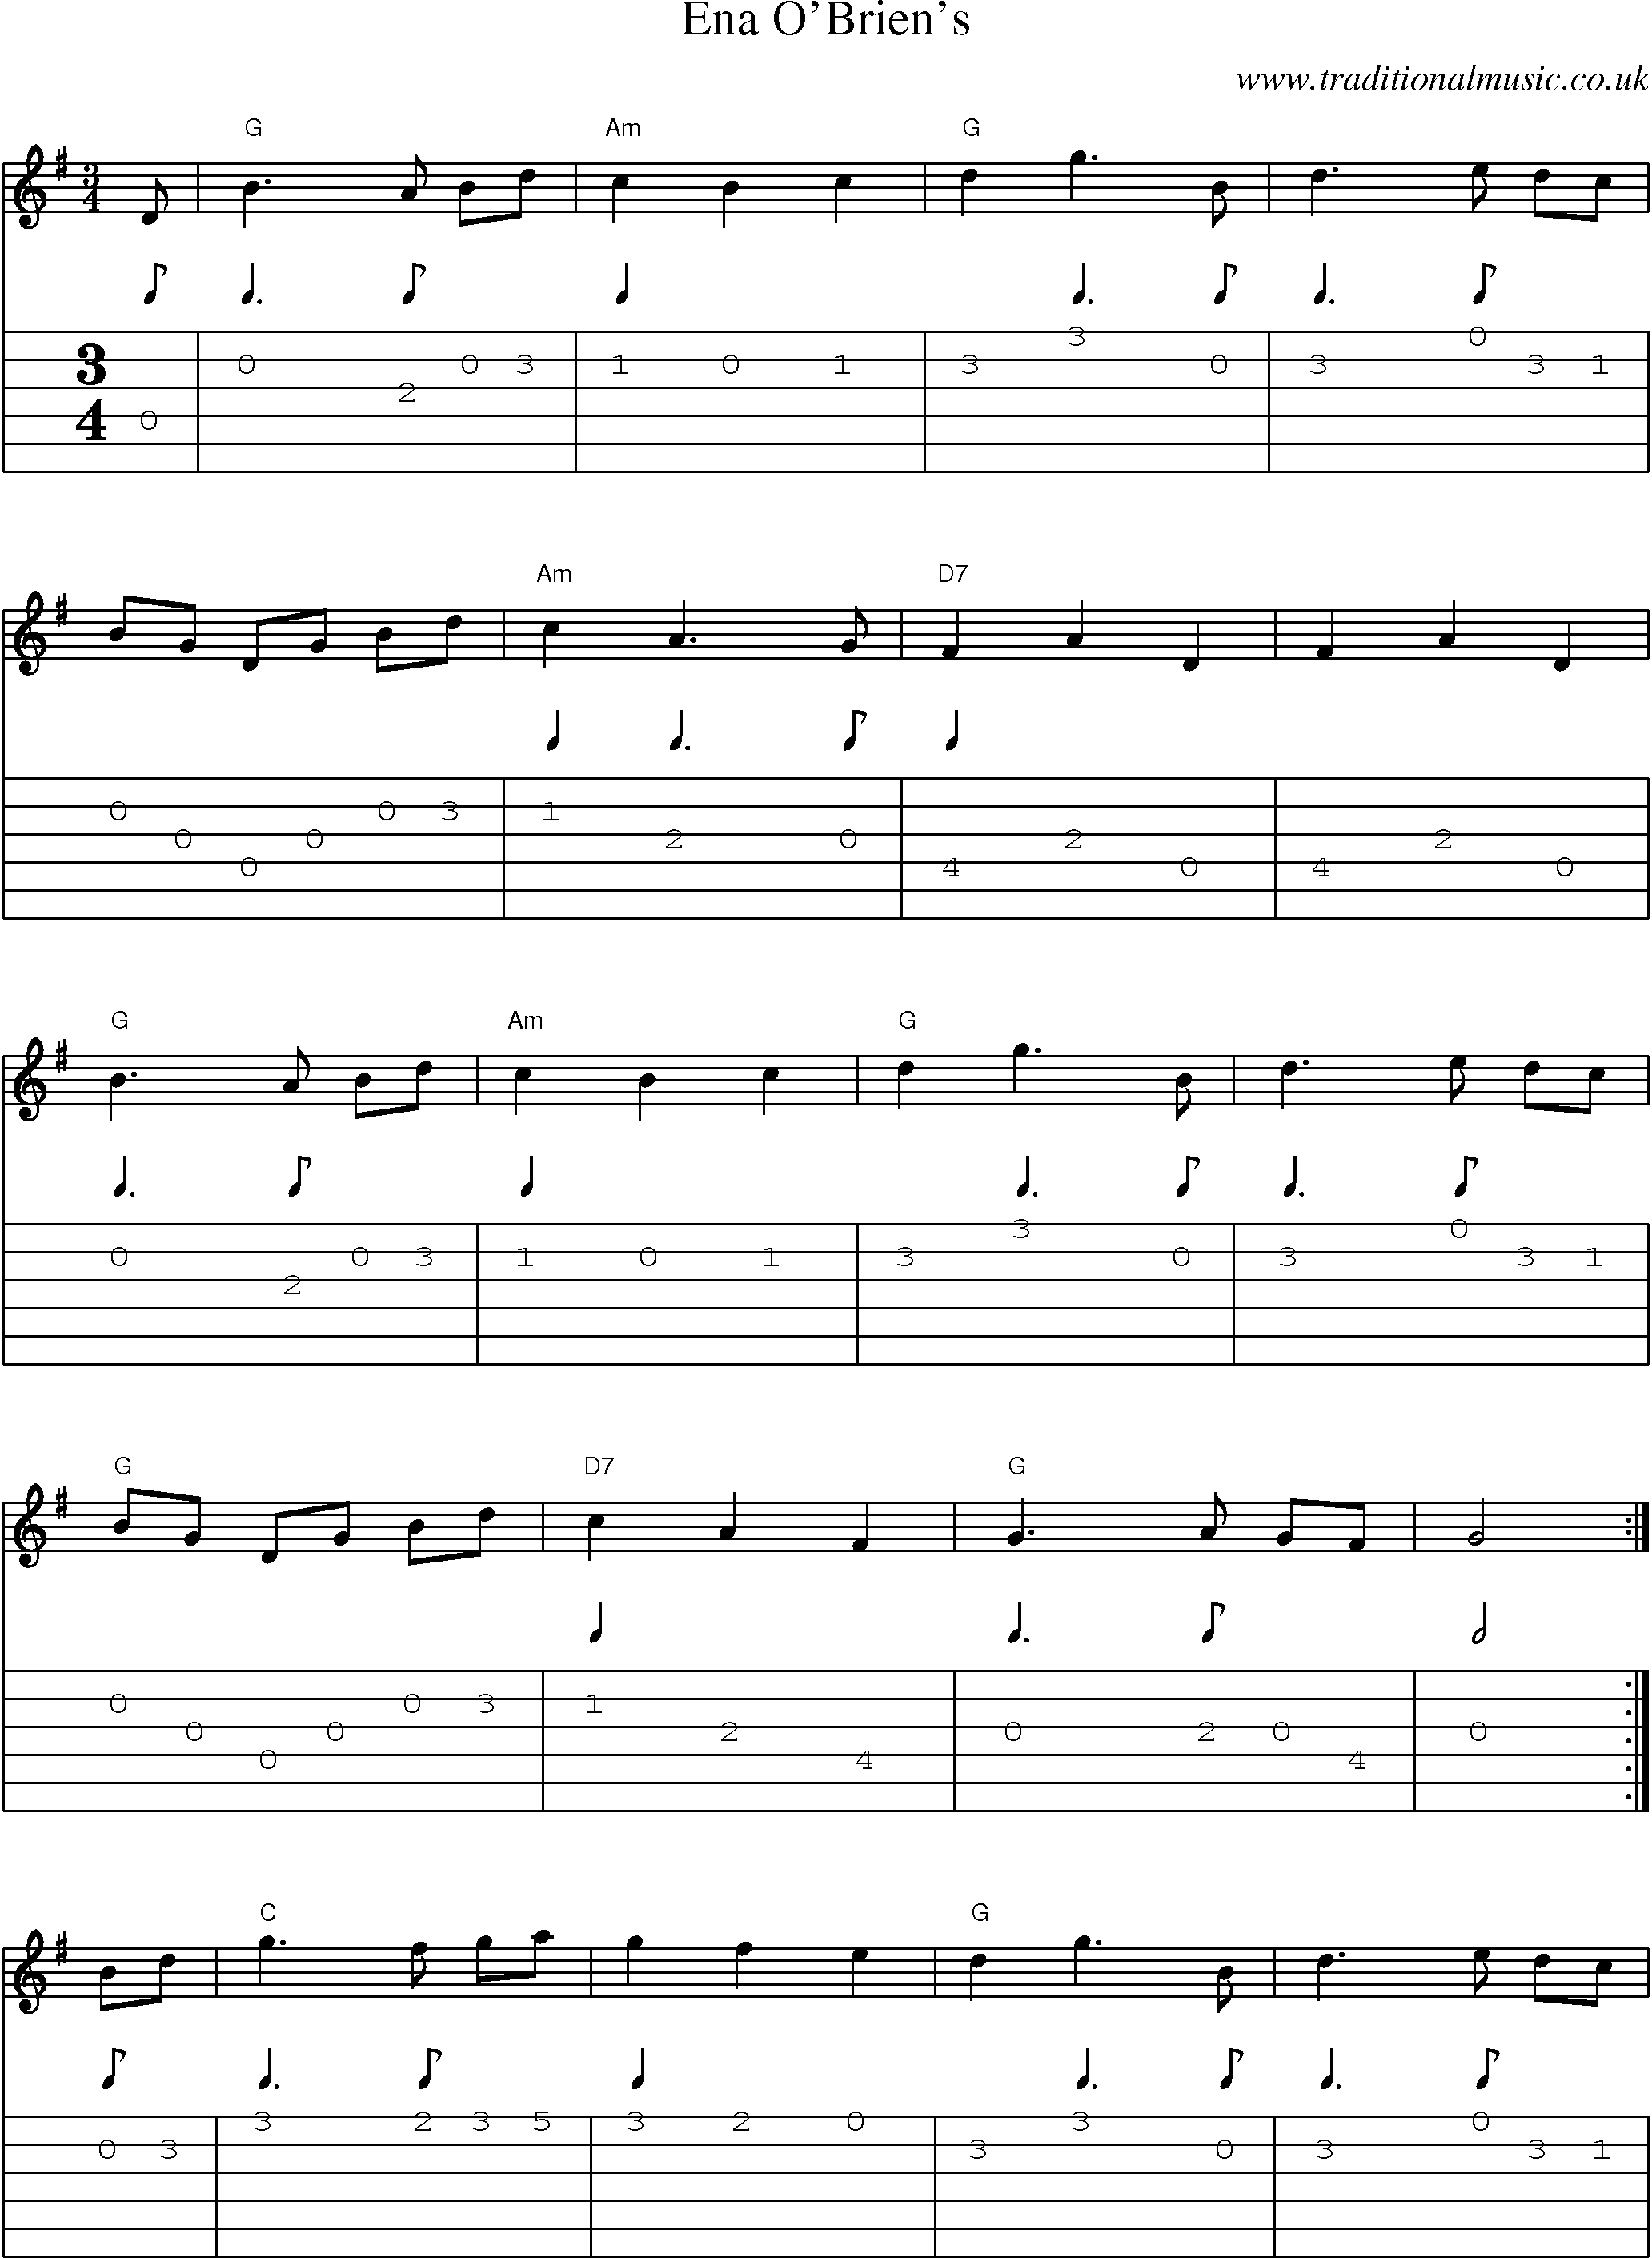 Music Score and Guitar Tabs for Ena Obriens